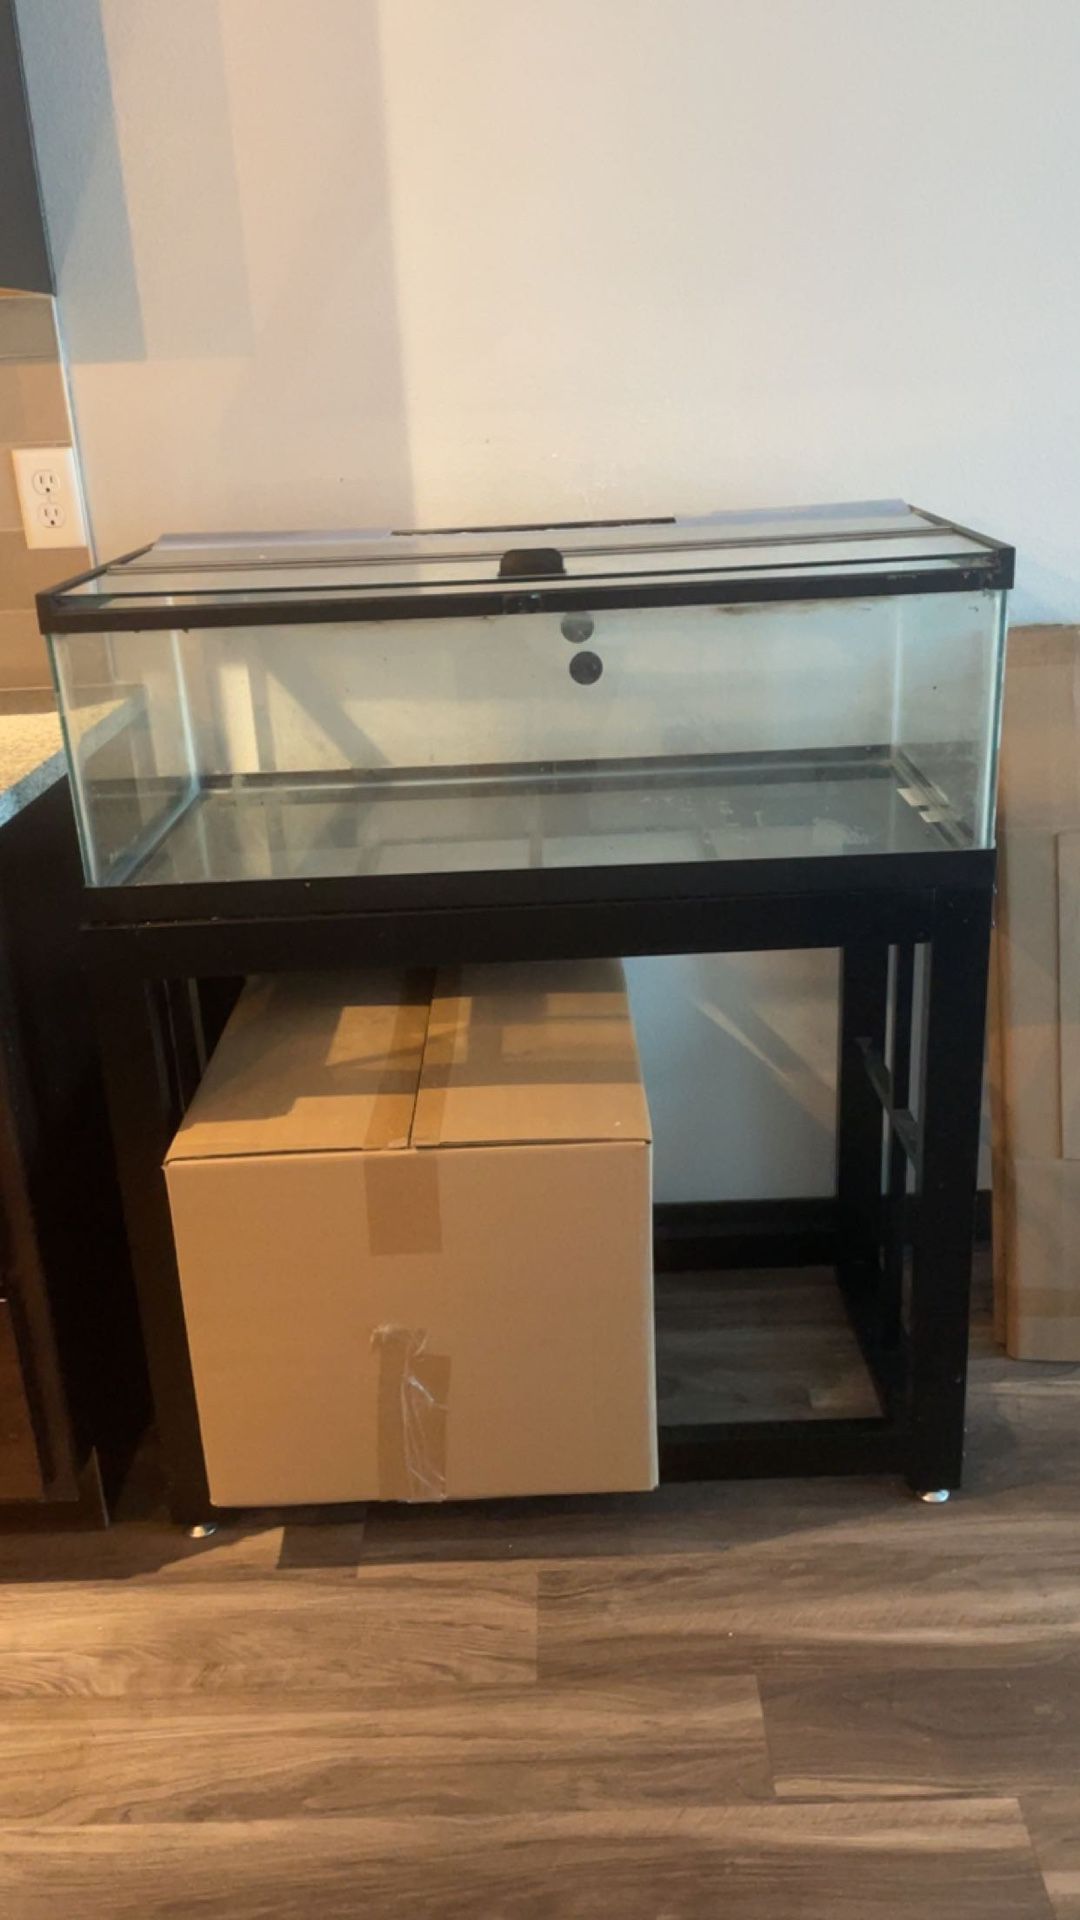 30 breeder tank/aquatic tank MATCHING STAND INCLUDED 